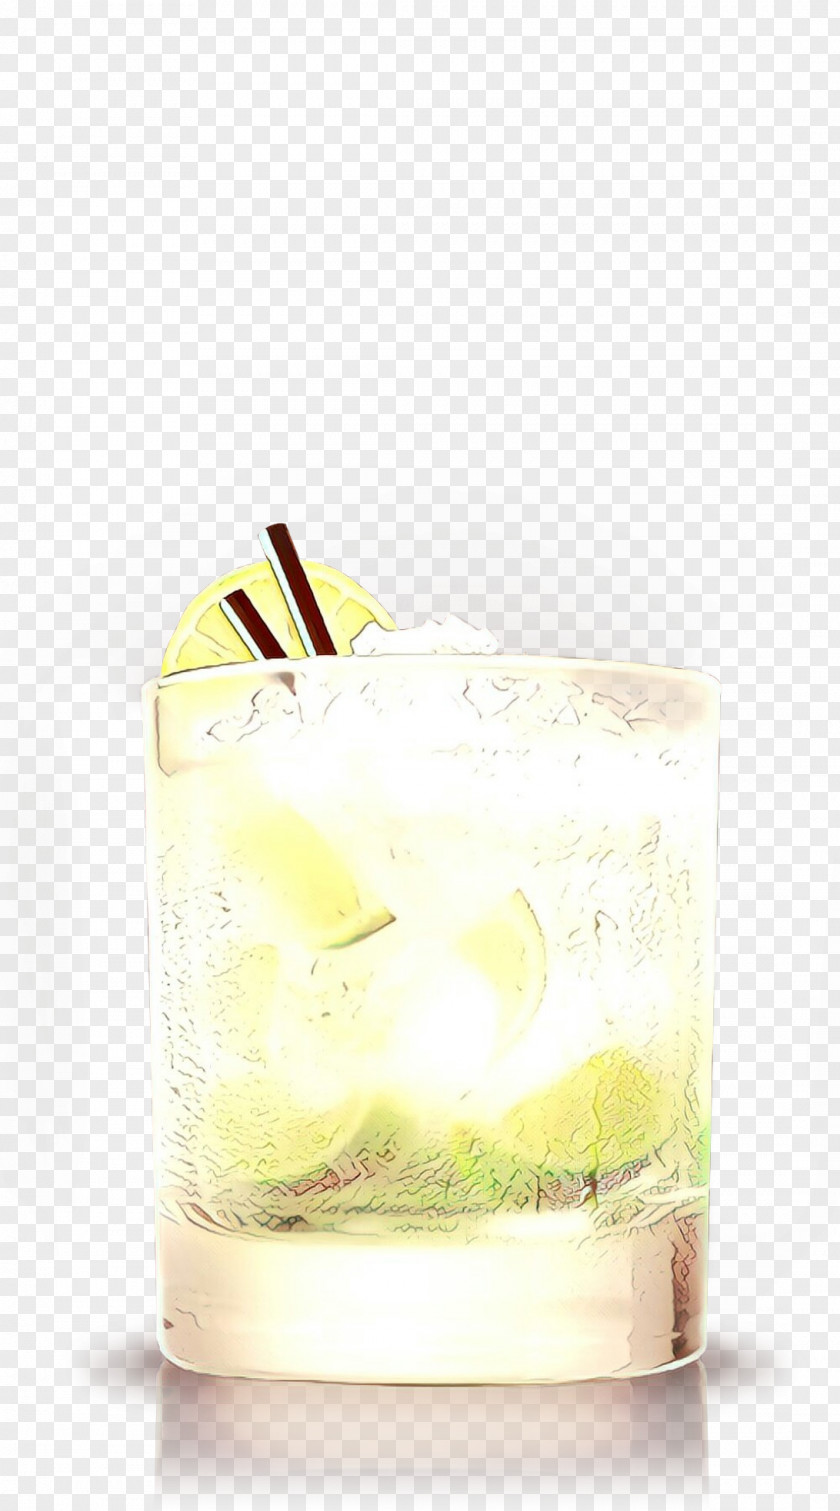 Distilled Beverage Vodka And Tonic Drink Whiskey Sour Alcoholic Caipirinha Cocktail PNG